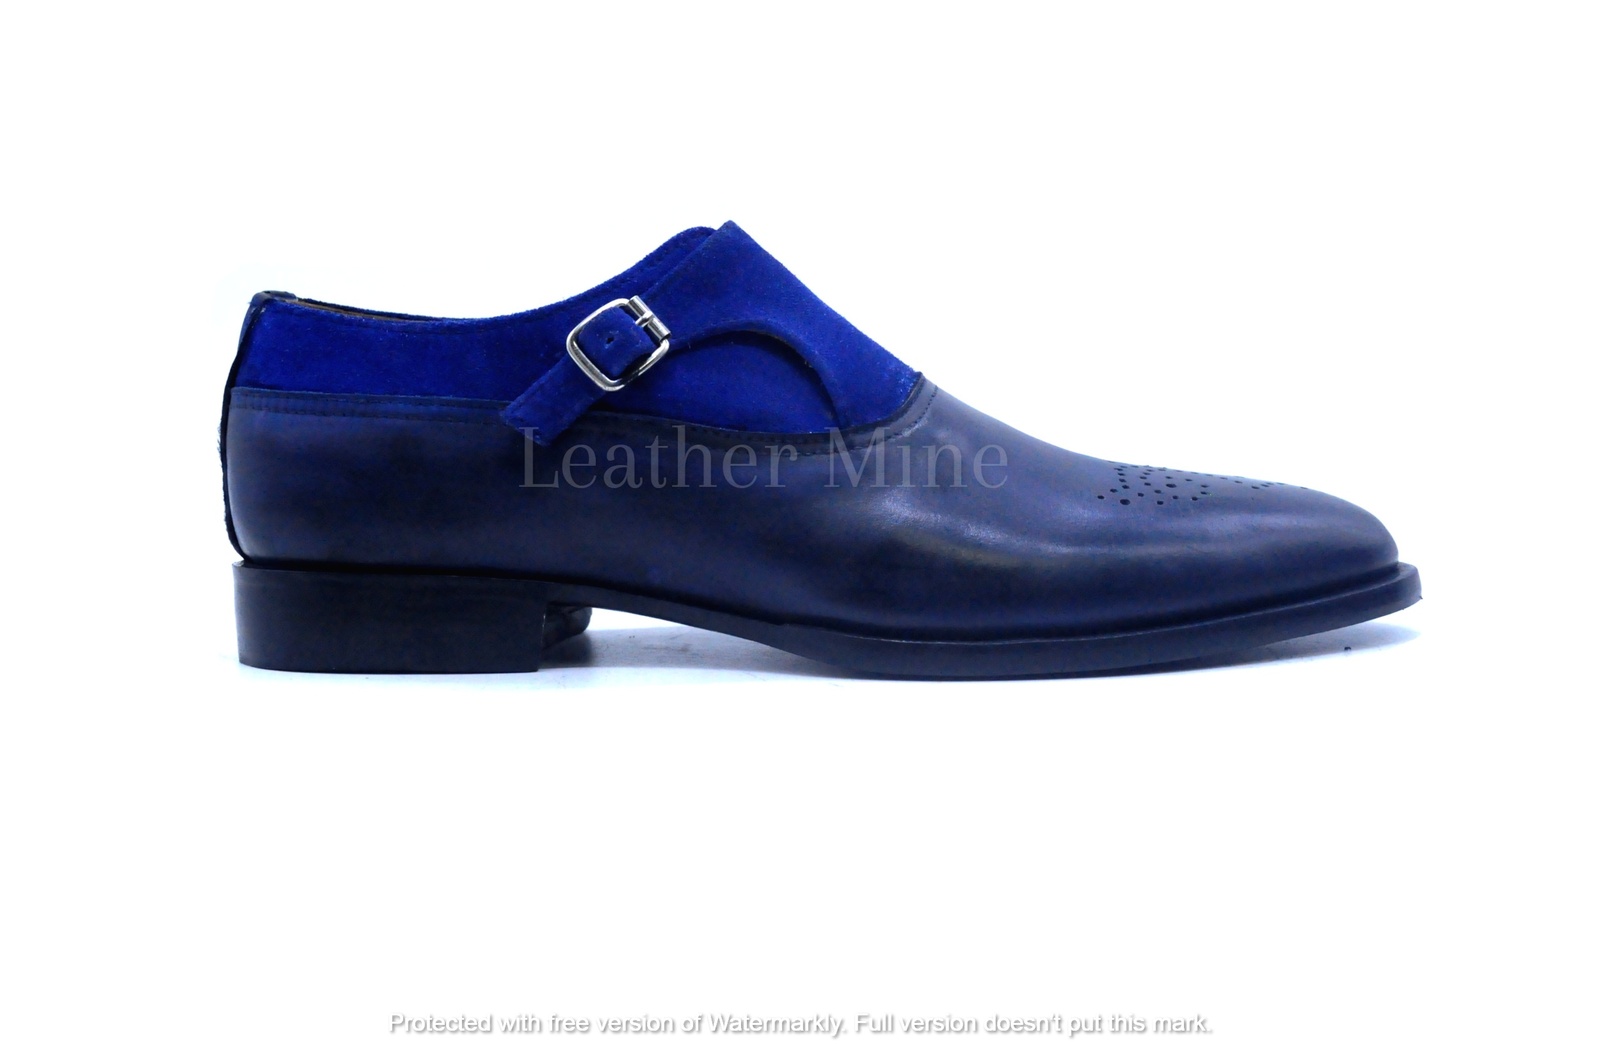 Handmade Blue Suede Monk Strap Dress Shoes, Genuine Leather Formal Shoes